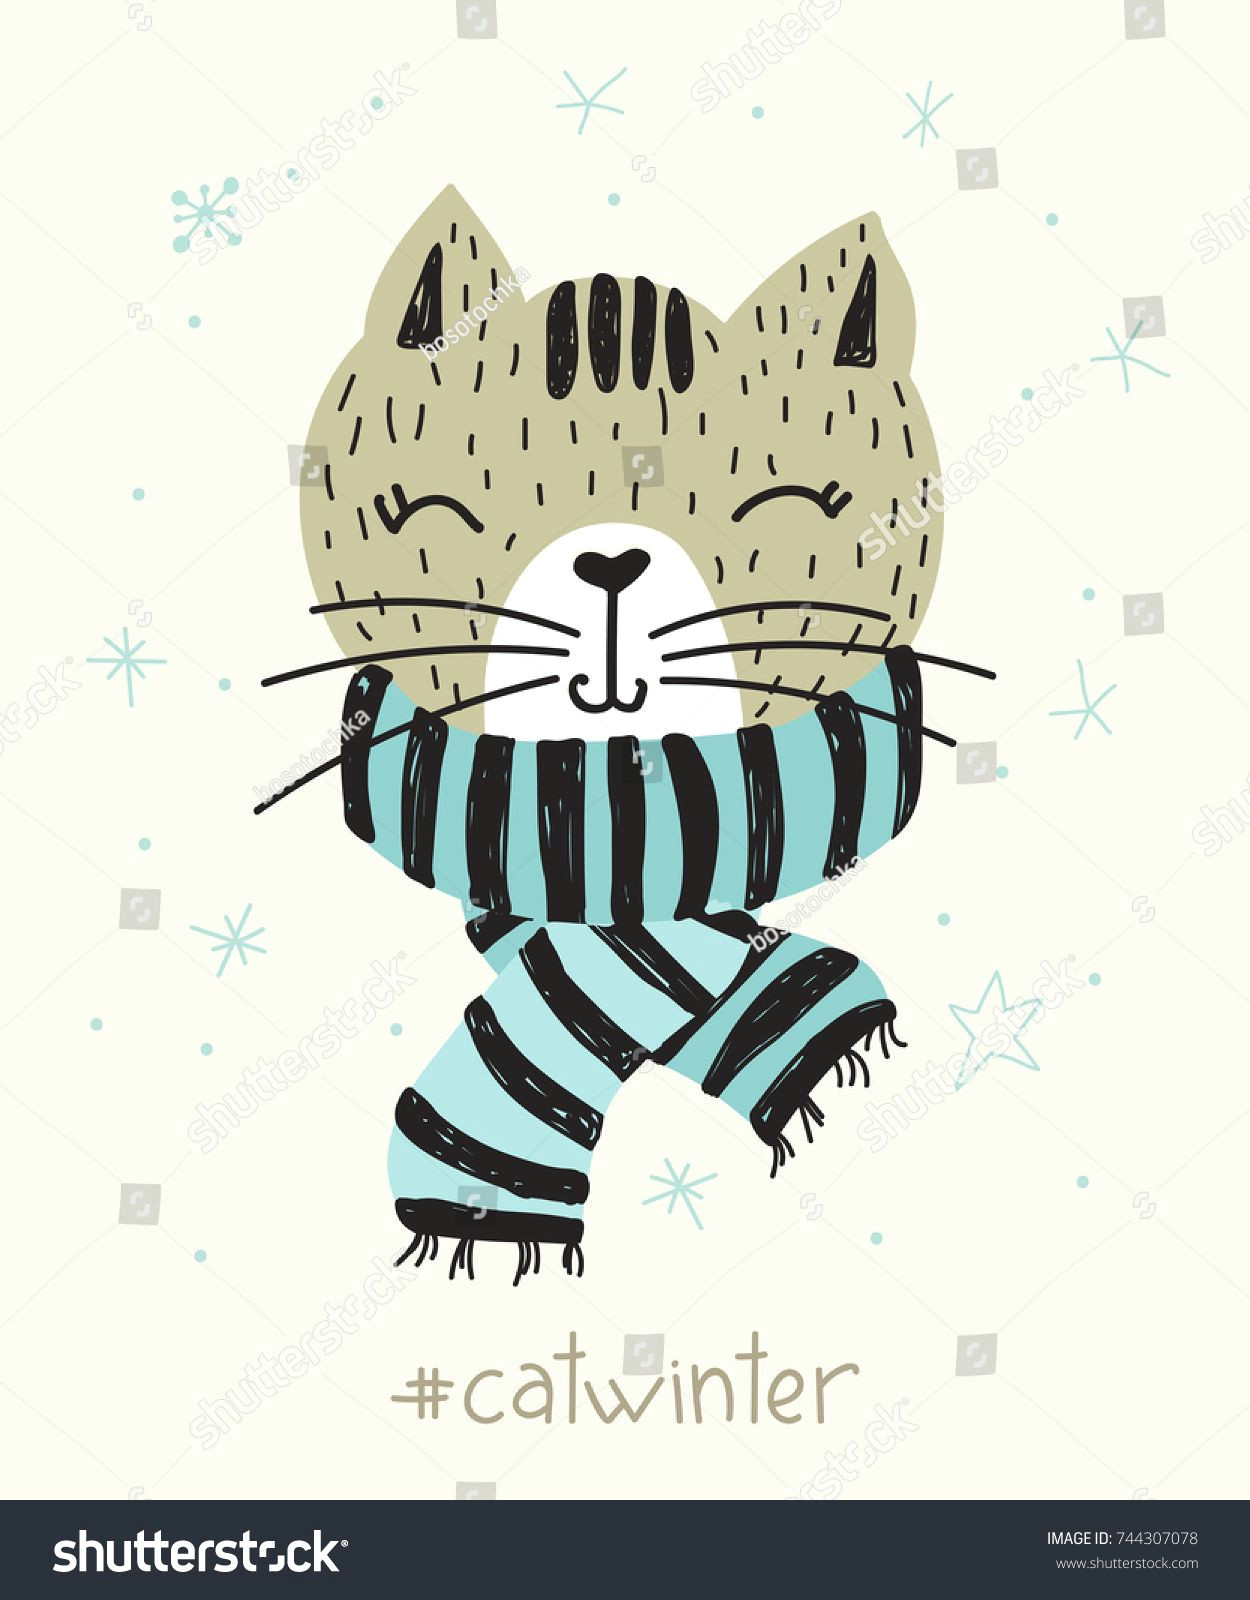 Funny Drawing Of A Cat Vector Poster with Hand Drawn Funny Cat Vector Illustration for